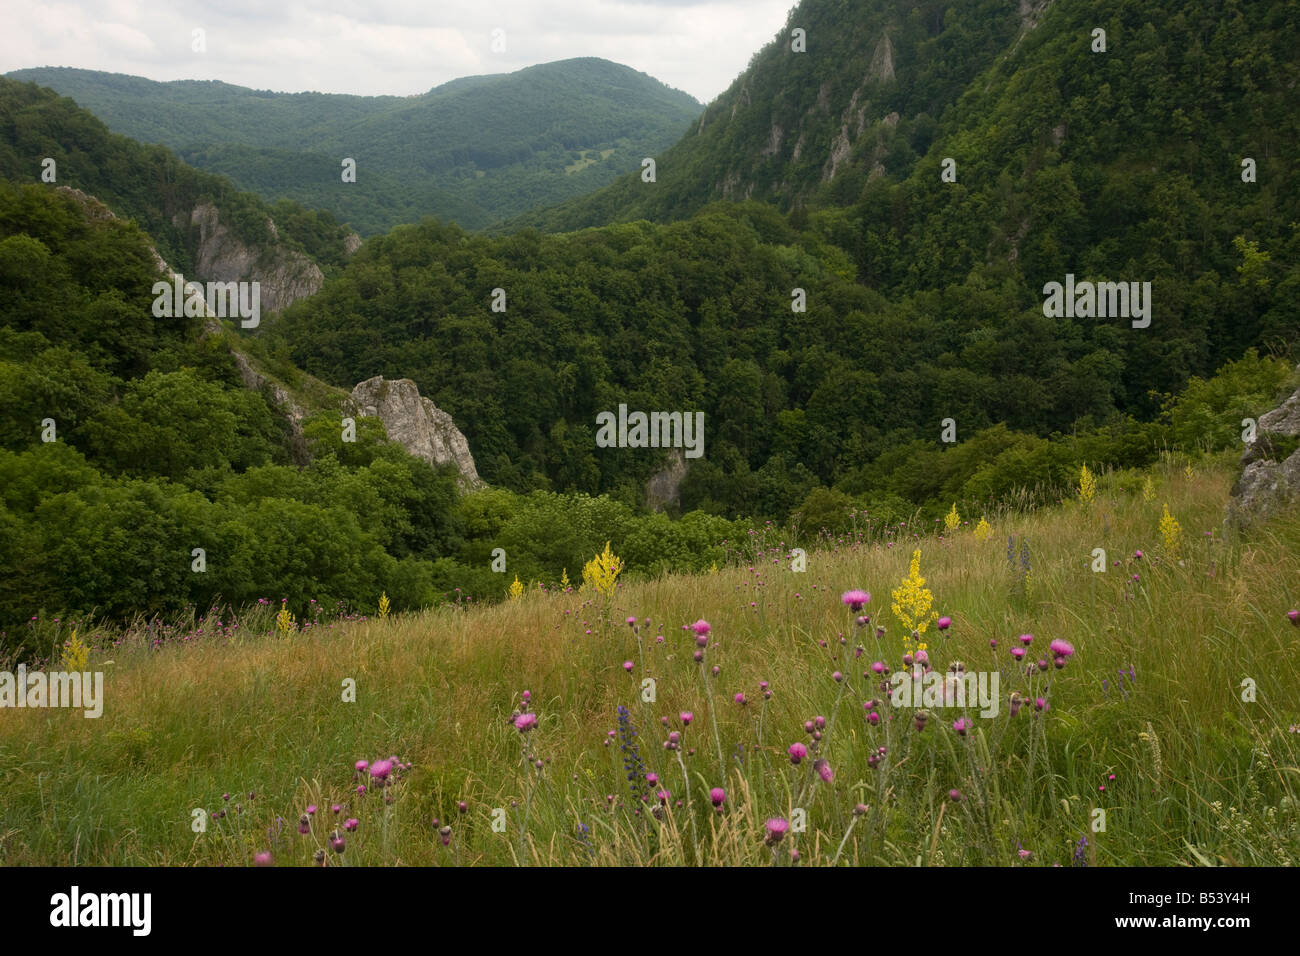 Montane flowery grassland above the wooded limestone Varghis Gorge near Baraolt Central Romania Stock Photo